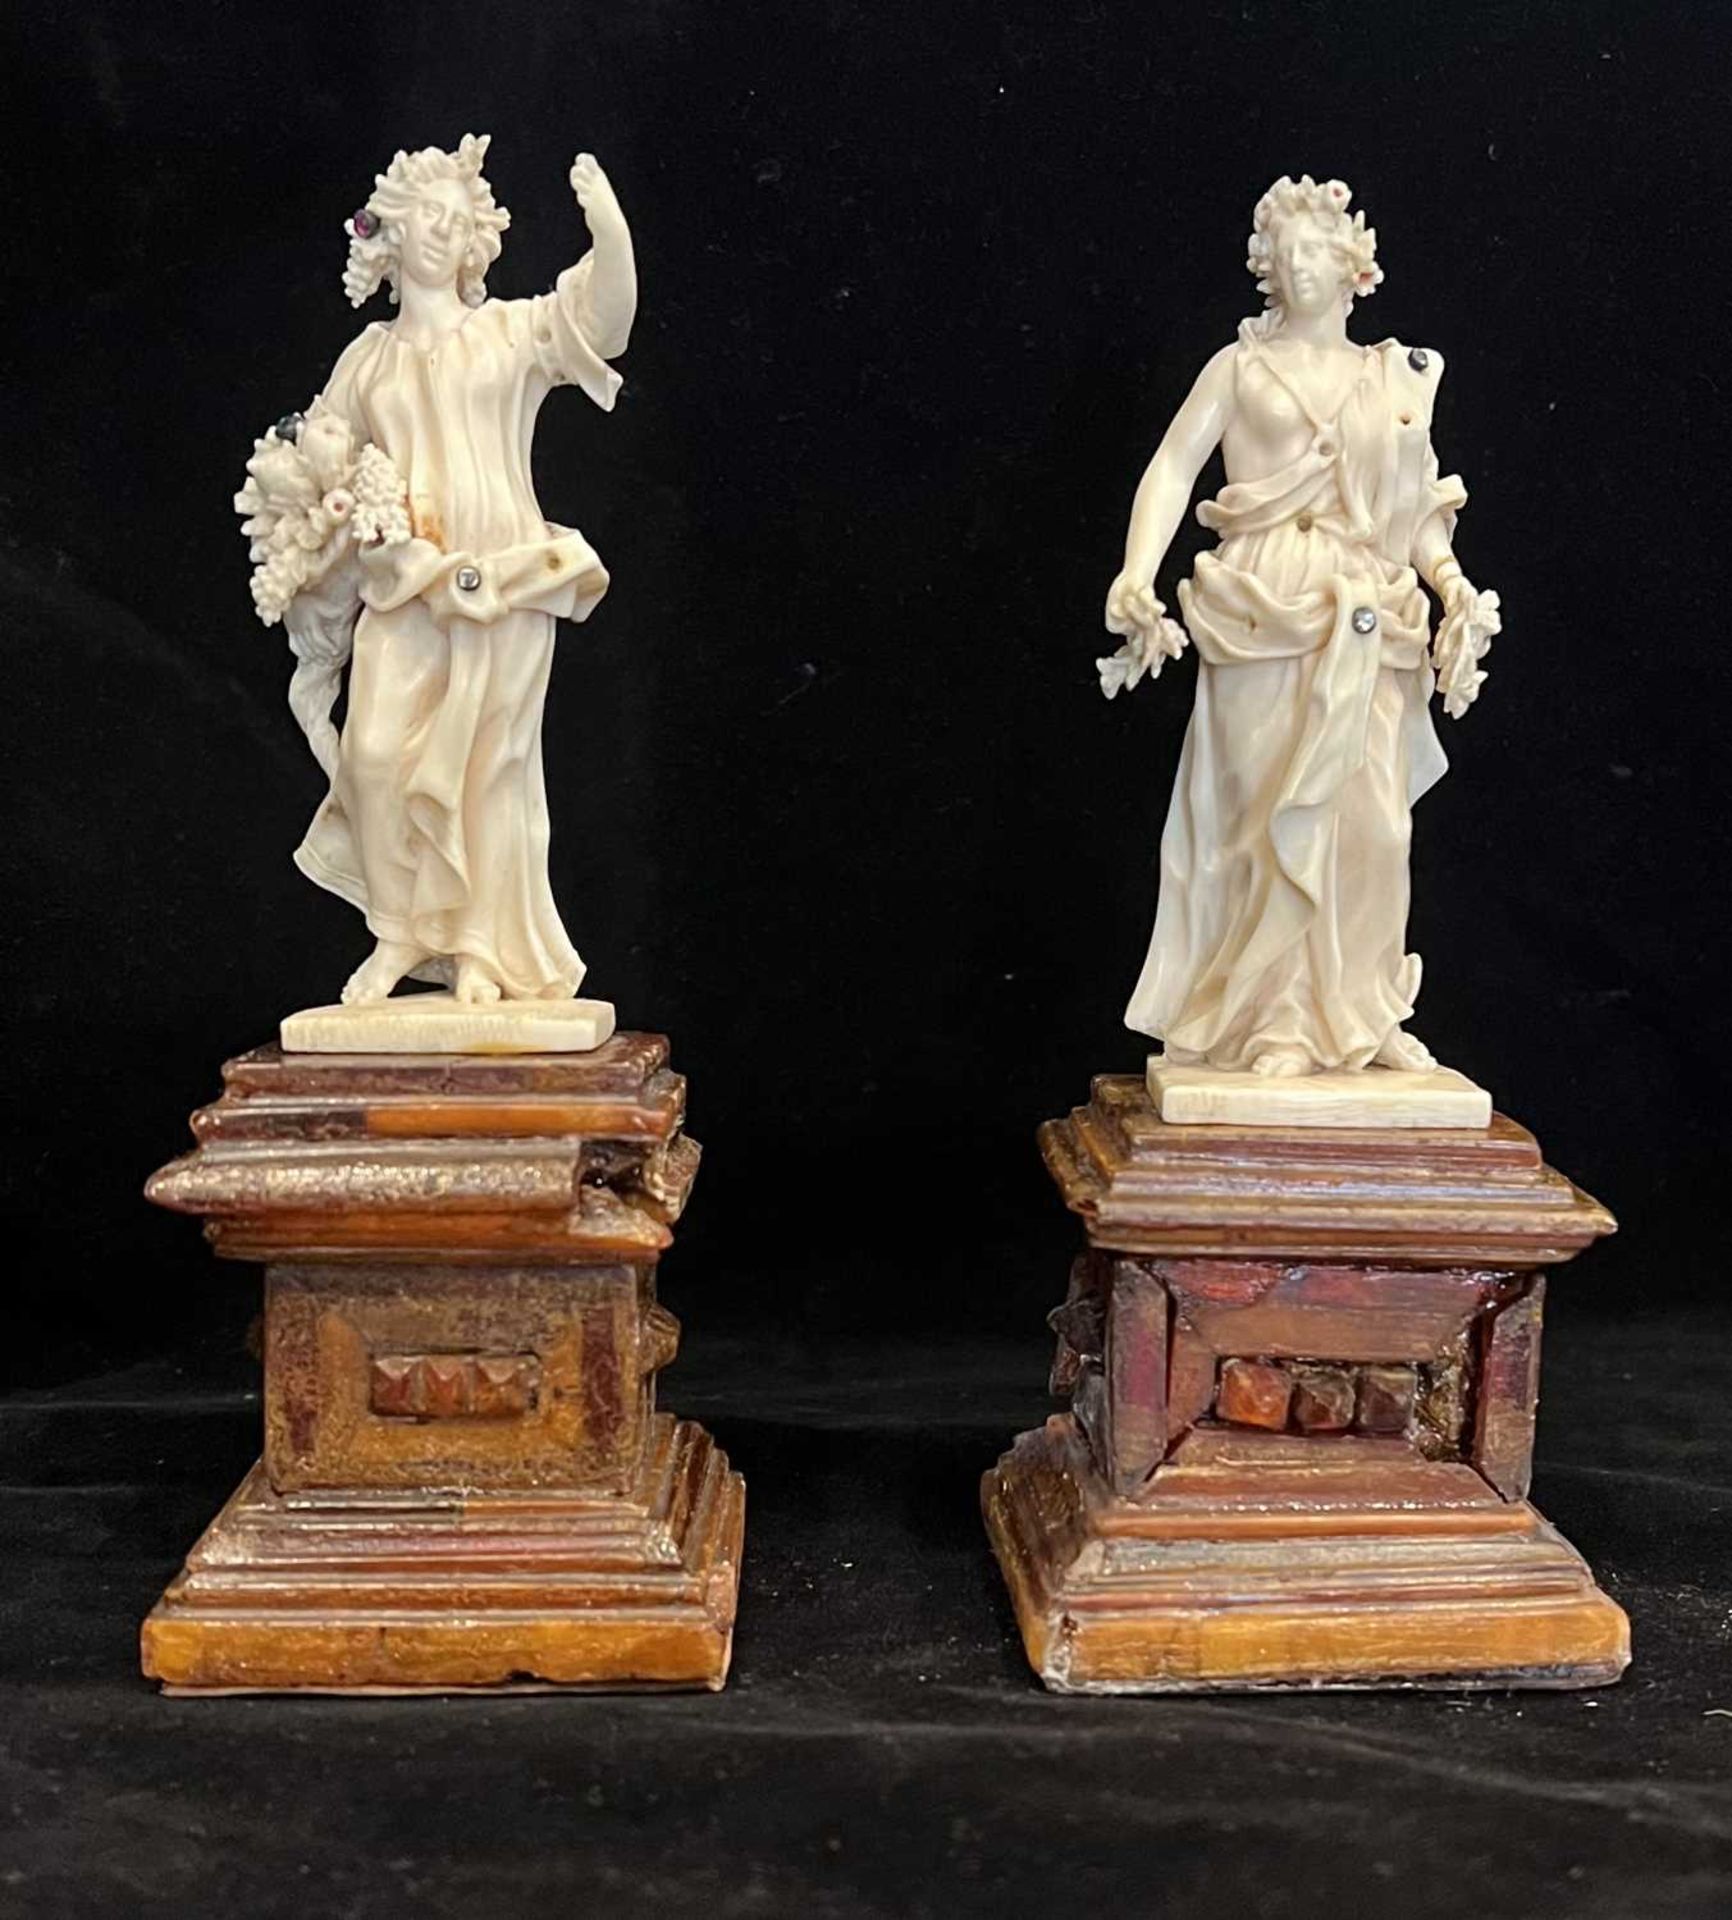 H.R.H PRINCESS MARGARET'S WEDDING GIFT: A PAIR OF 18TH CENTURY IVORY FIGURES OF SPRING AND AUTUMN - Image 9 of 14